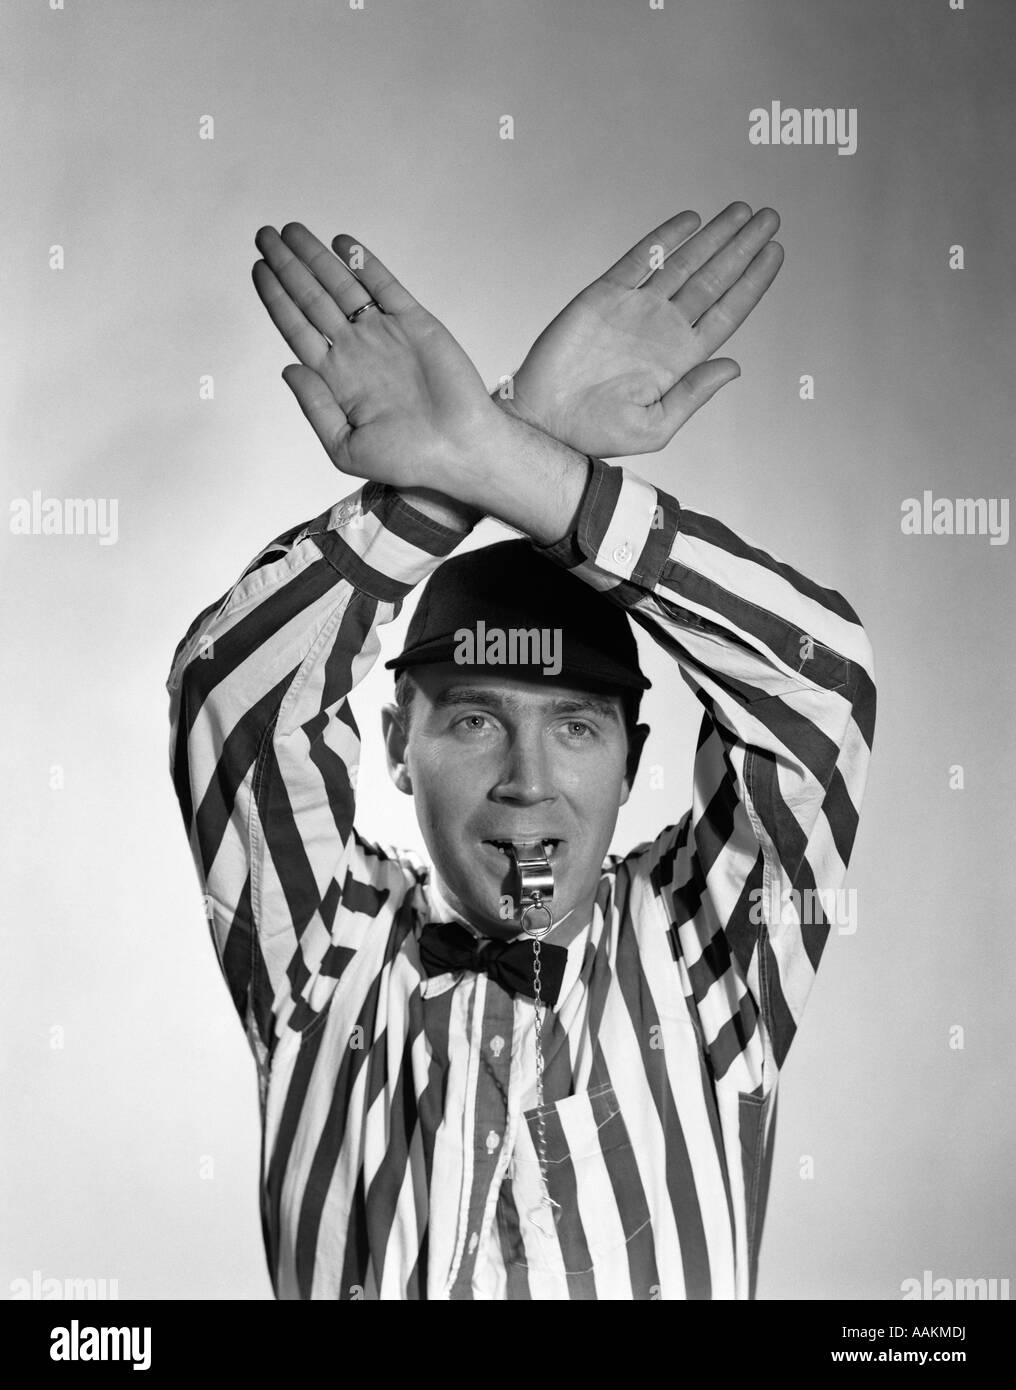 1950s FOOTBALL REFEREE MAKING HAND SIGNAL TIME OUT BLOWING WHISTLE Stock Photo